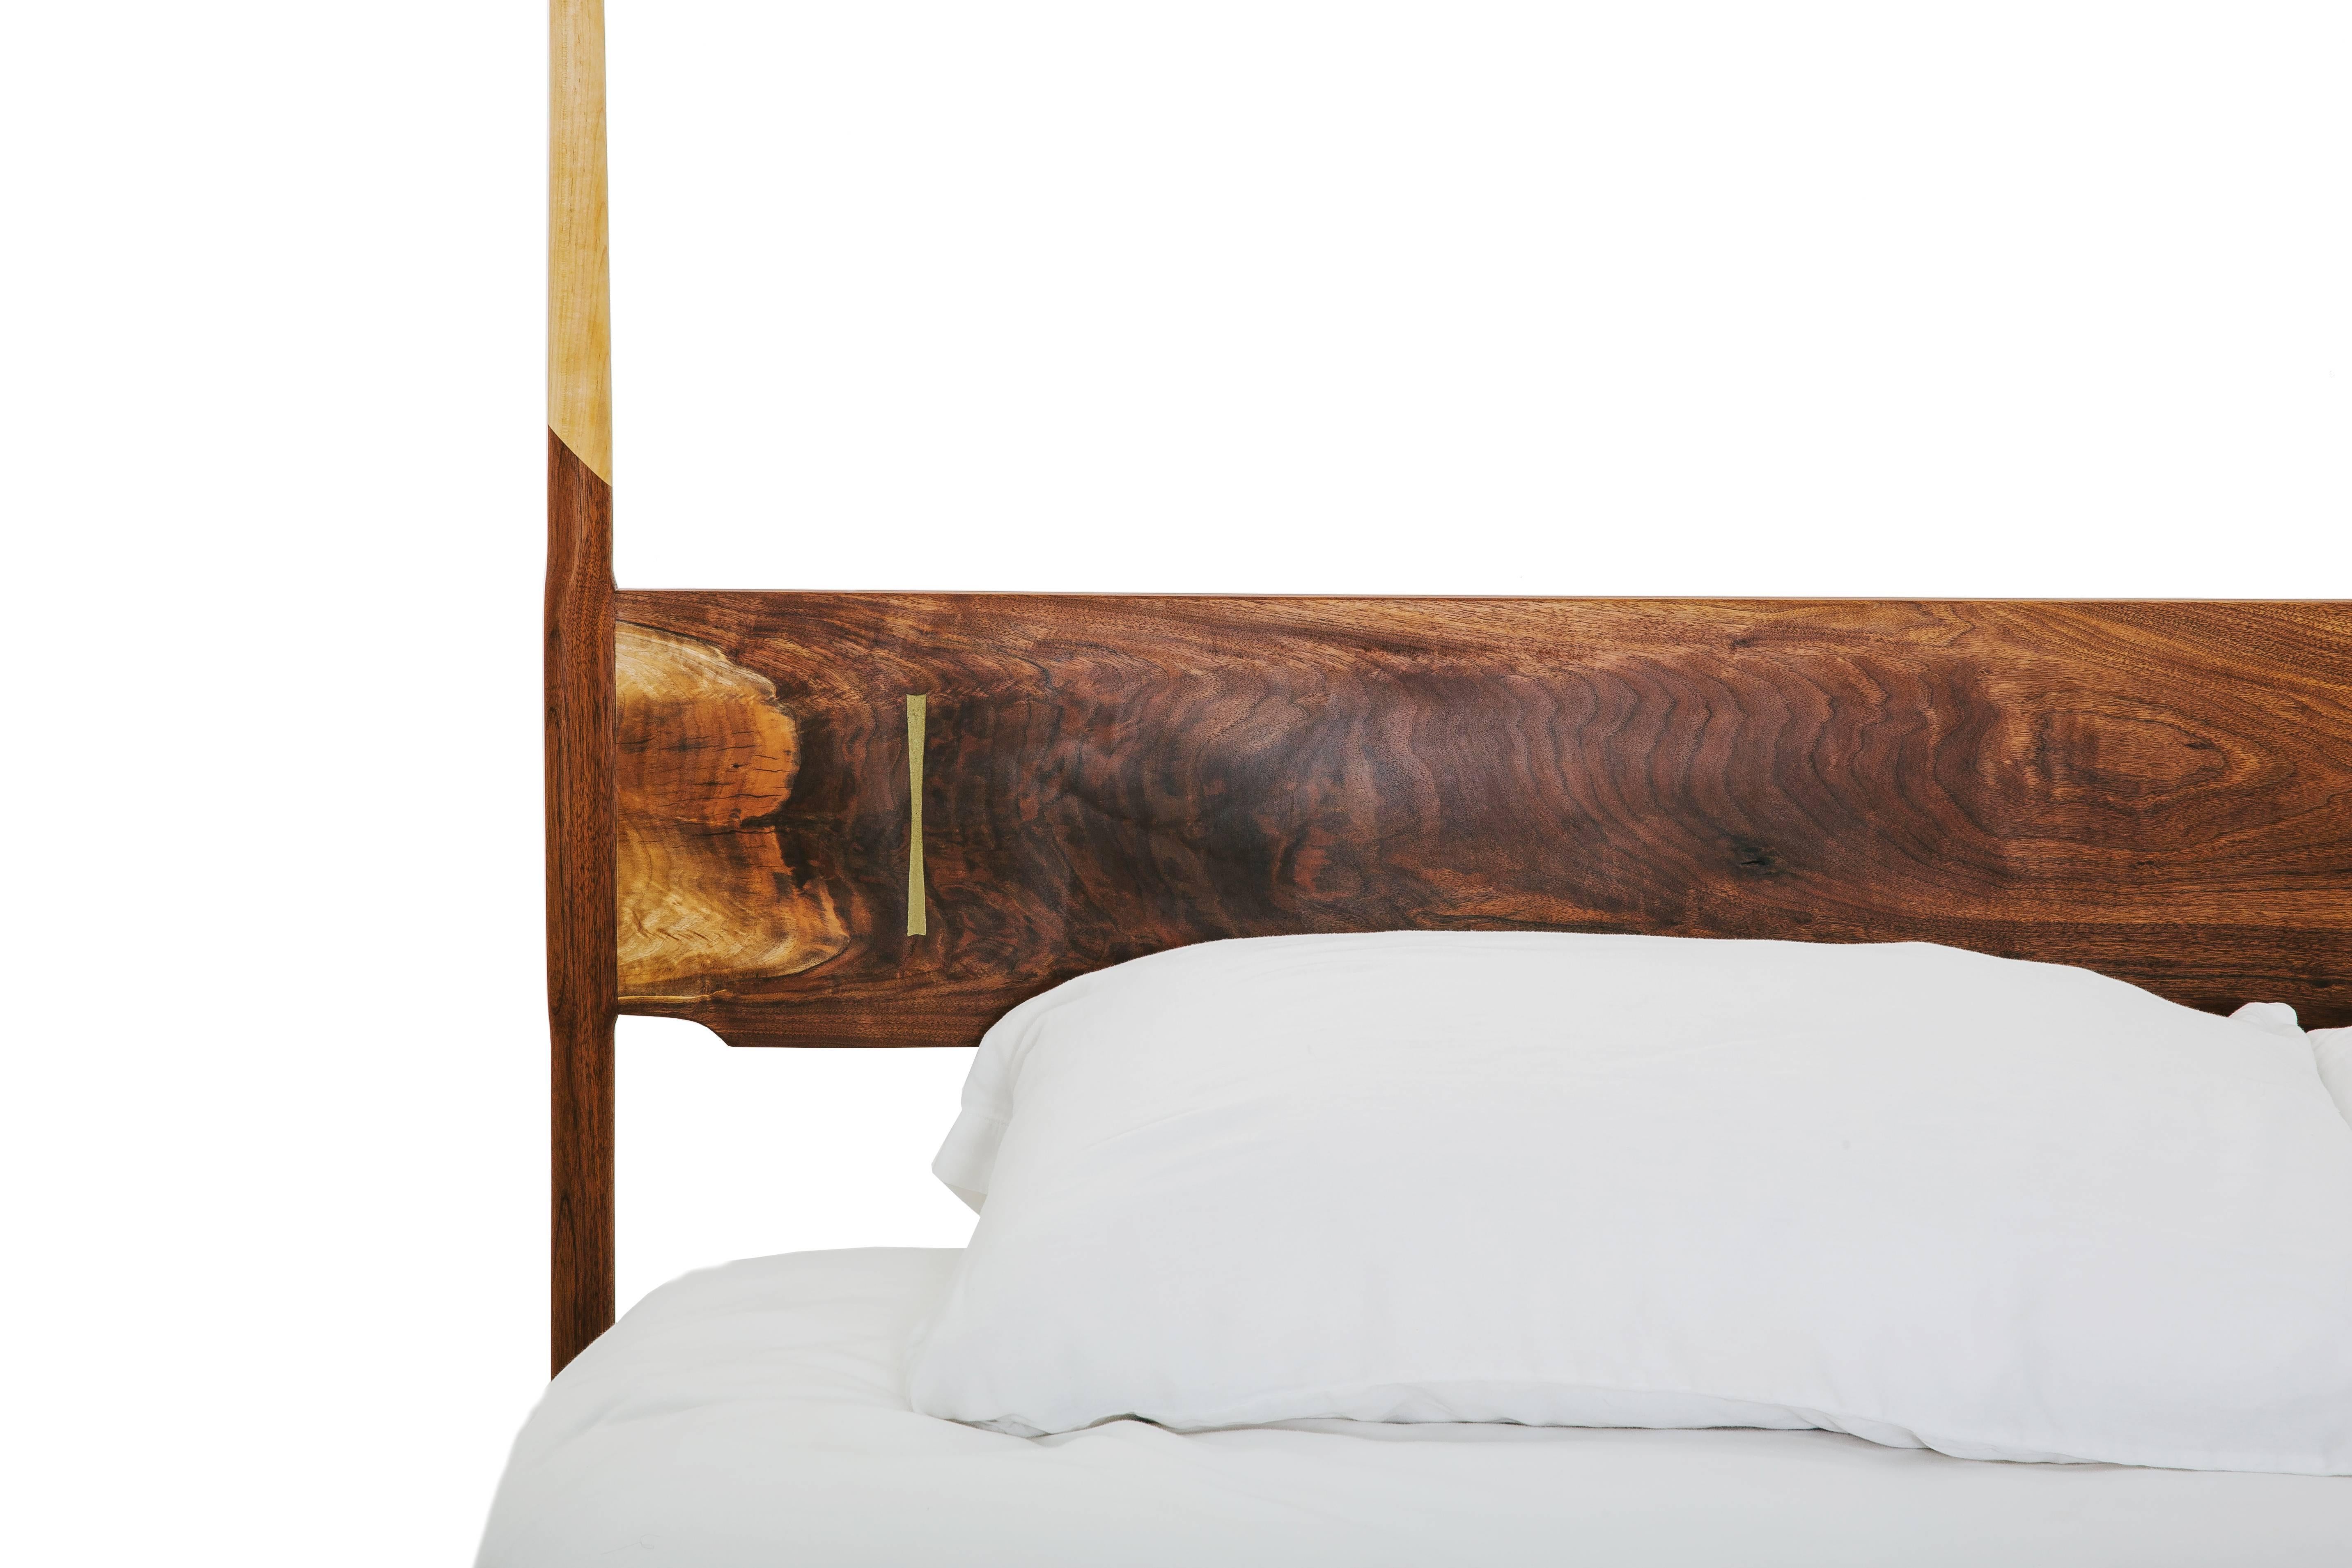 Australian Super King, Four Post Mid-Century Modern, handcrafted walnut and maple bed with solid wood construction, hand-cut joinery and custom Dutchman joint. Handmade in Los Angeles, California.

Headboard or bed frame as shown in walnut with